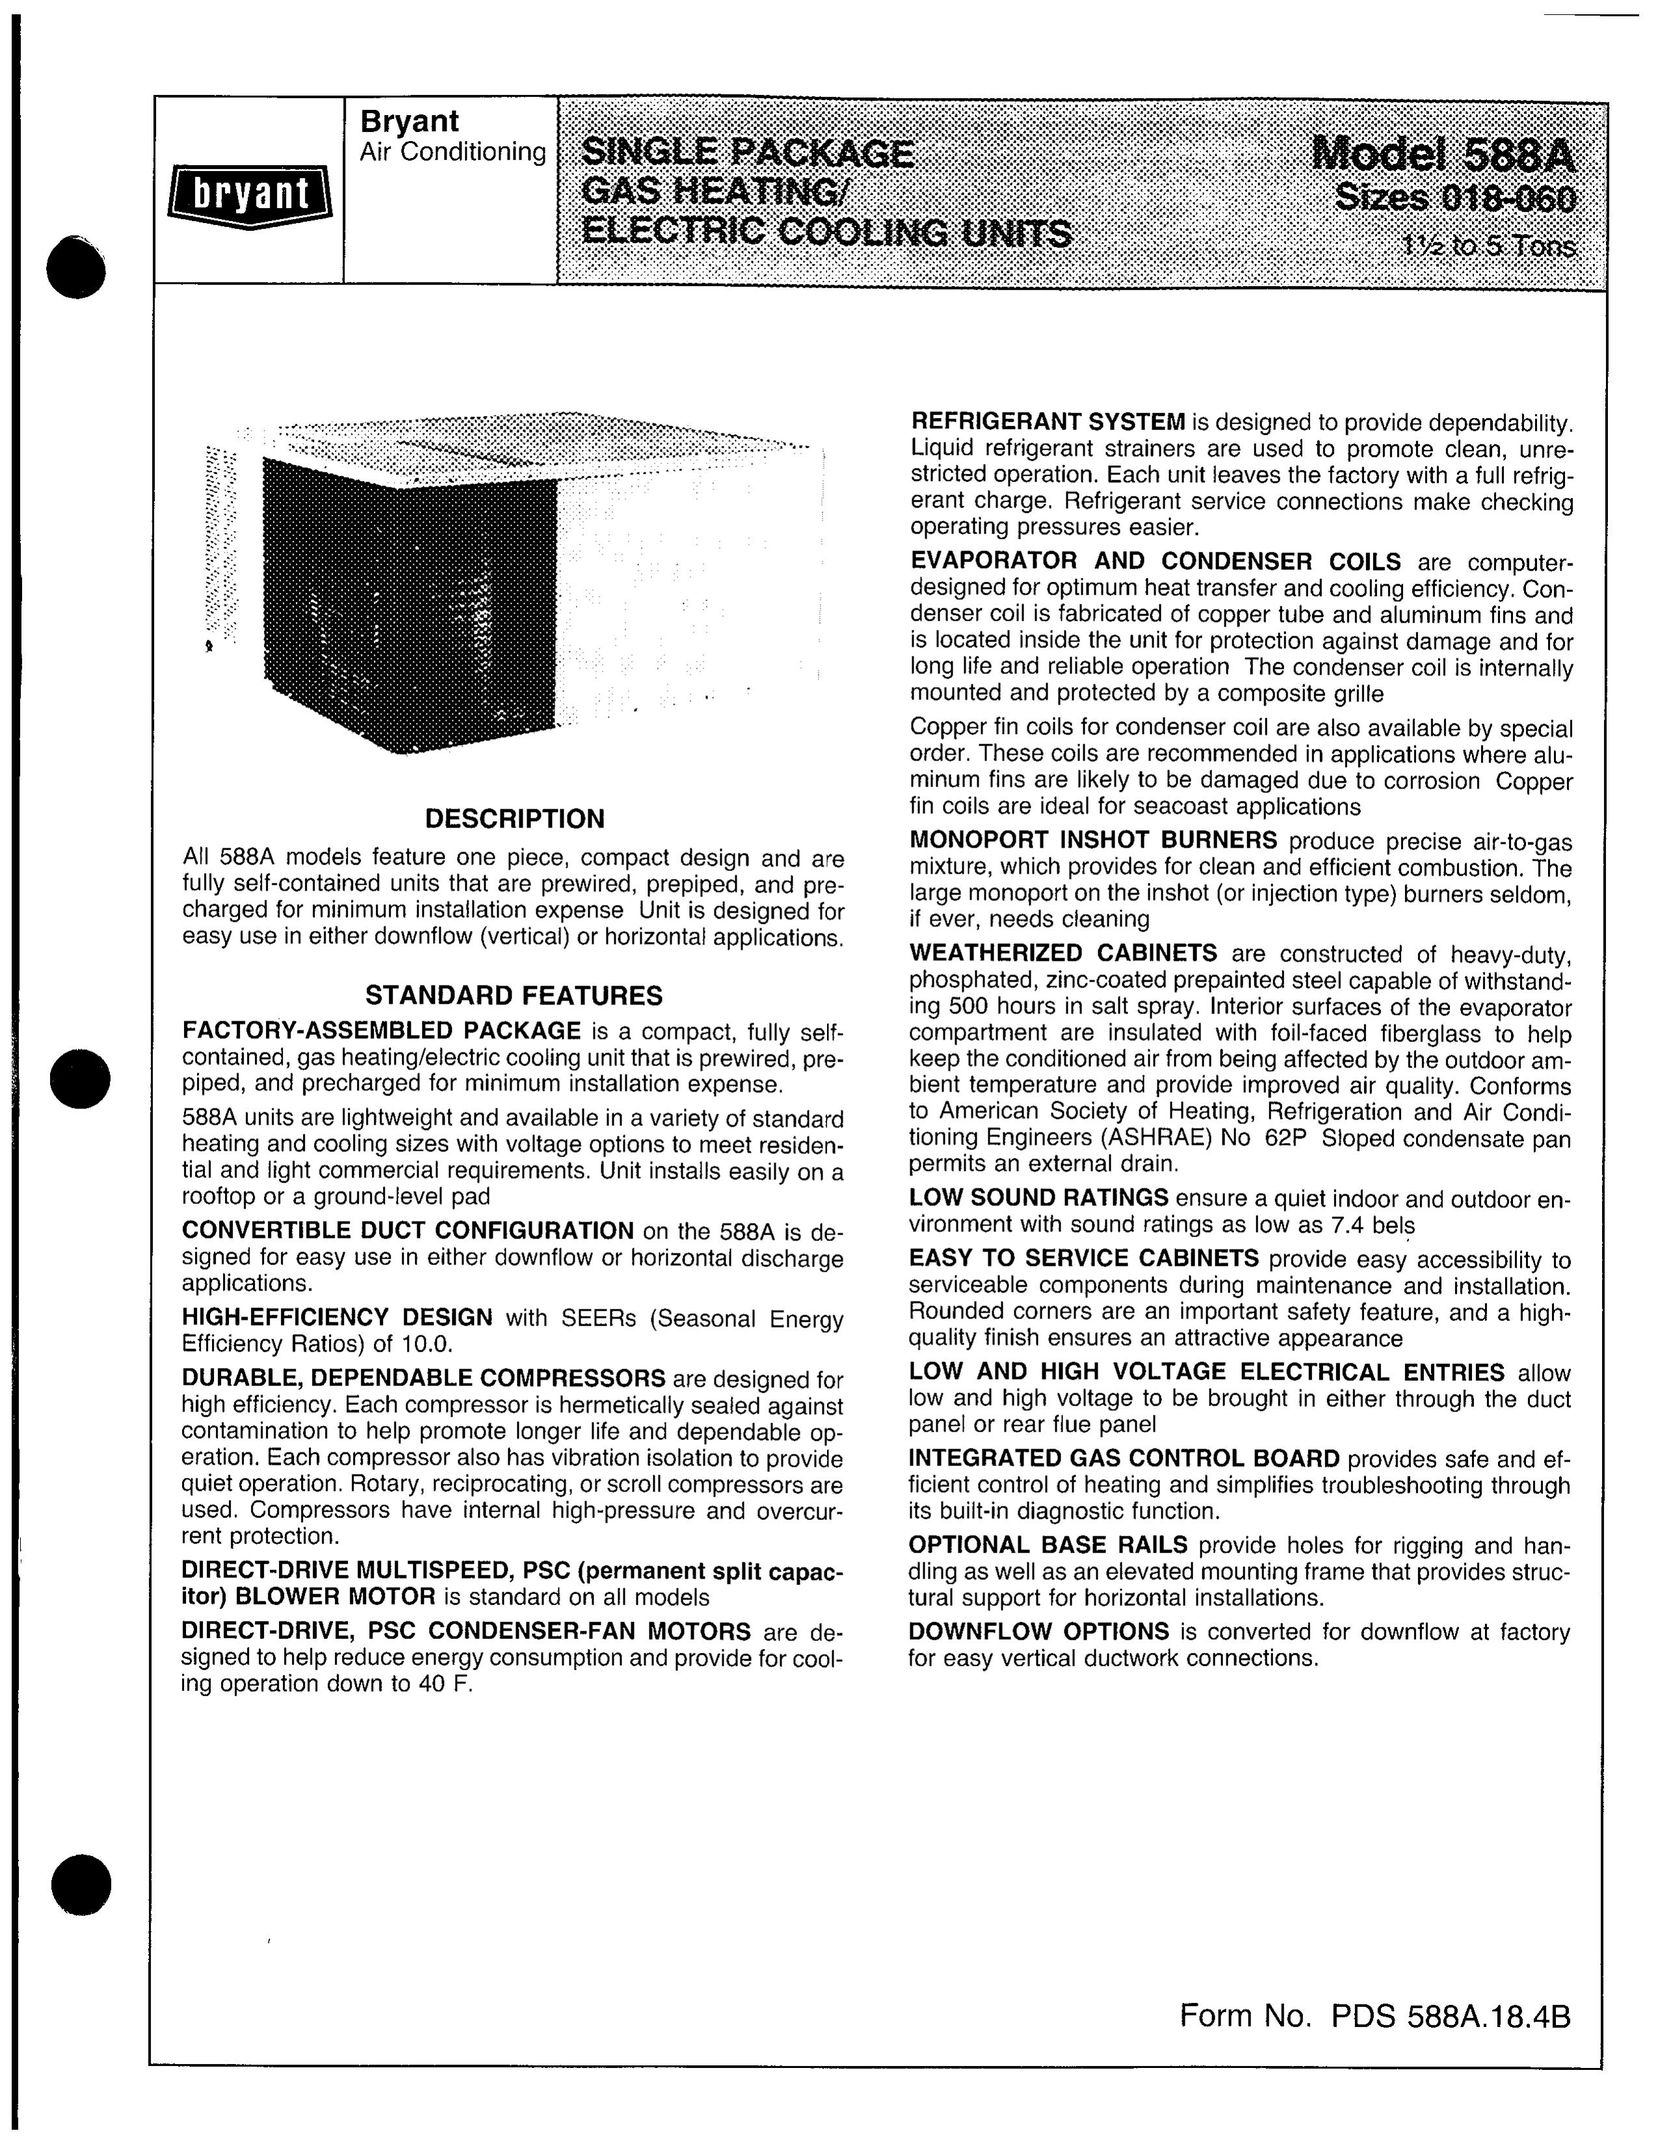 Bryant 588A Heating System User Manual